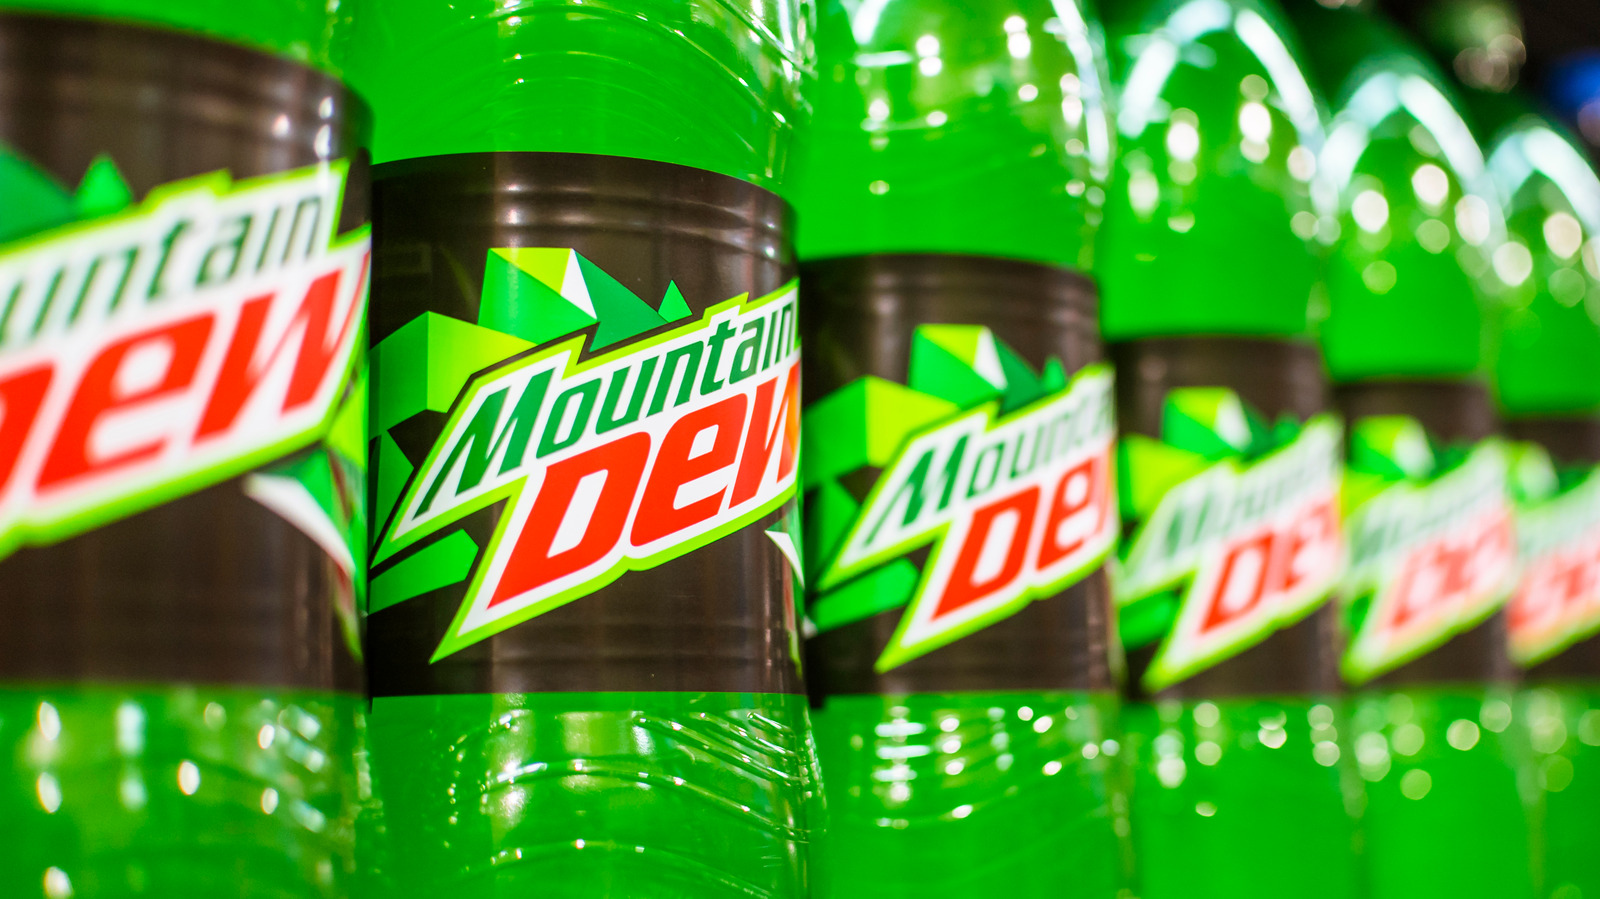 What The Original Version Of Mountain Dew Tasted Like